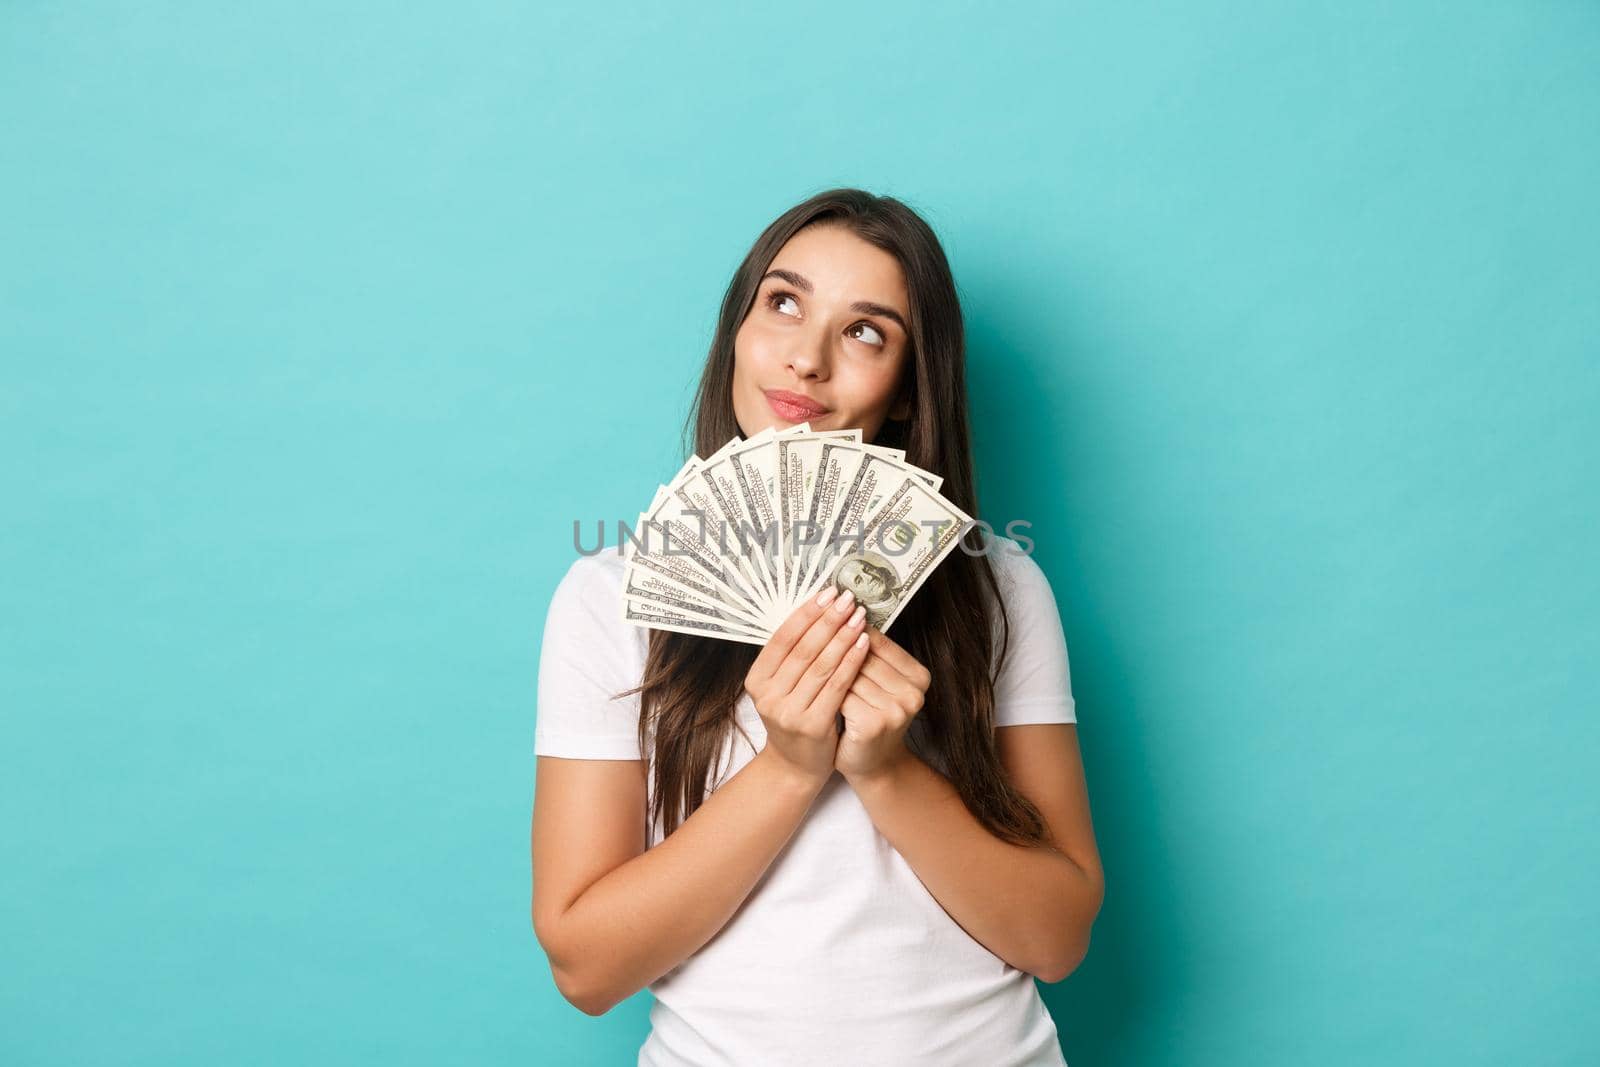 Portrait of attractive brunette woman in white t-shirt, dreaming about shopping, holding money, standing over blue background.